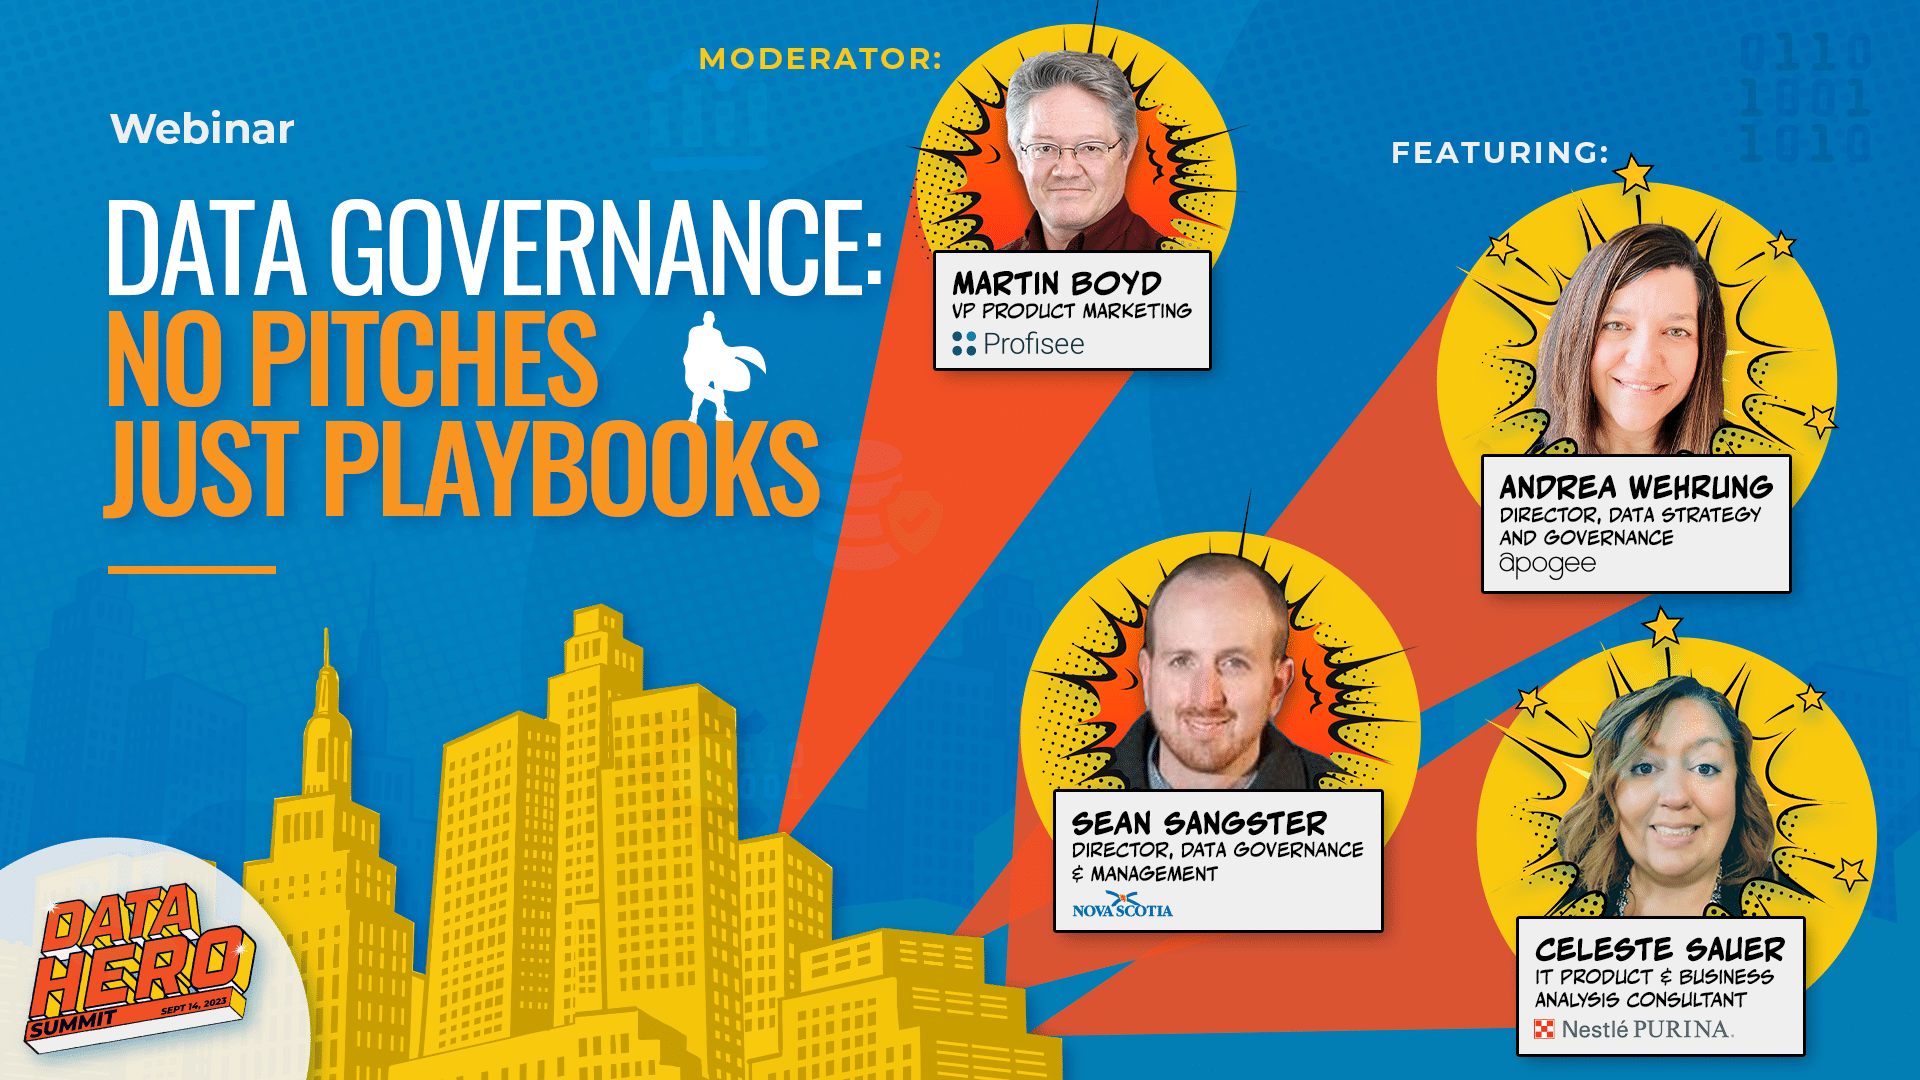 Data Governance: No Pitches, Just Playbooks